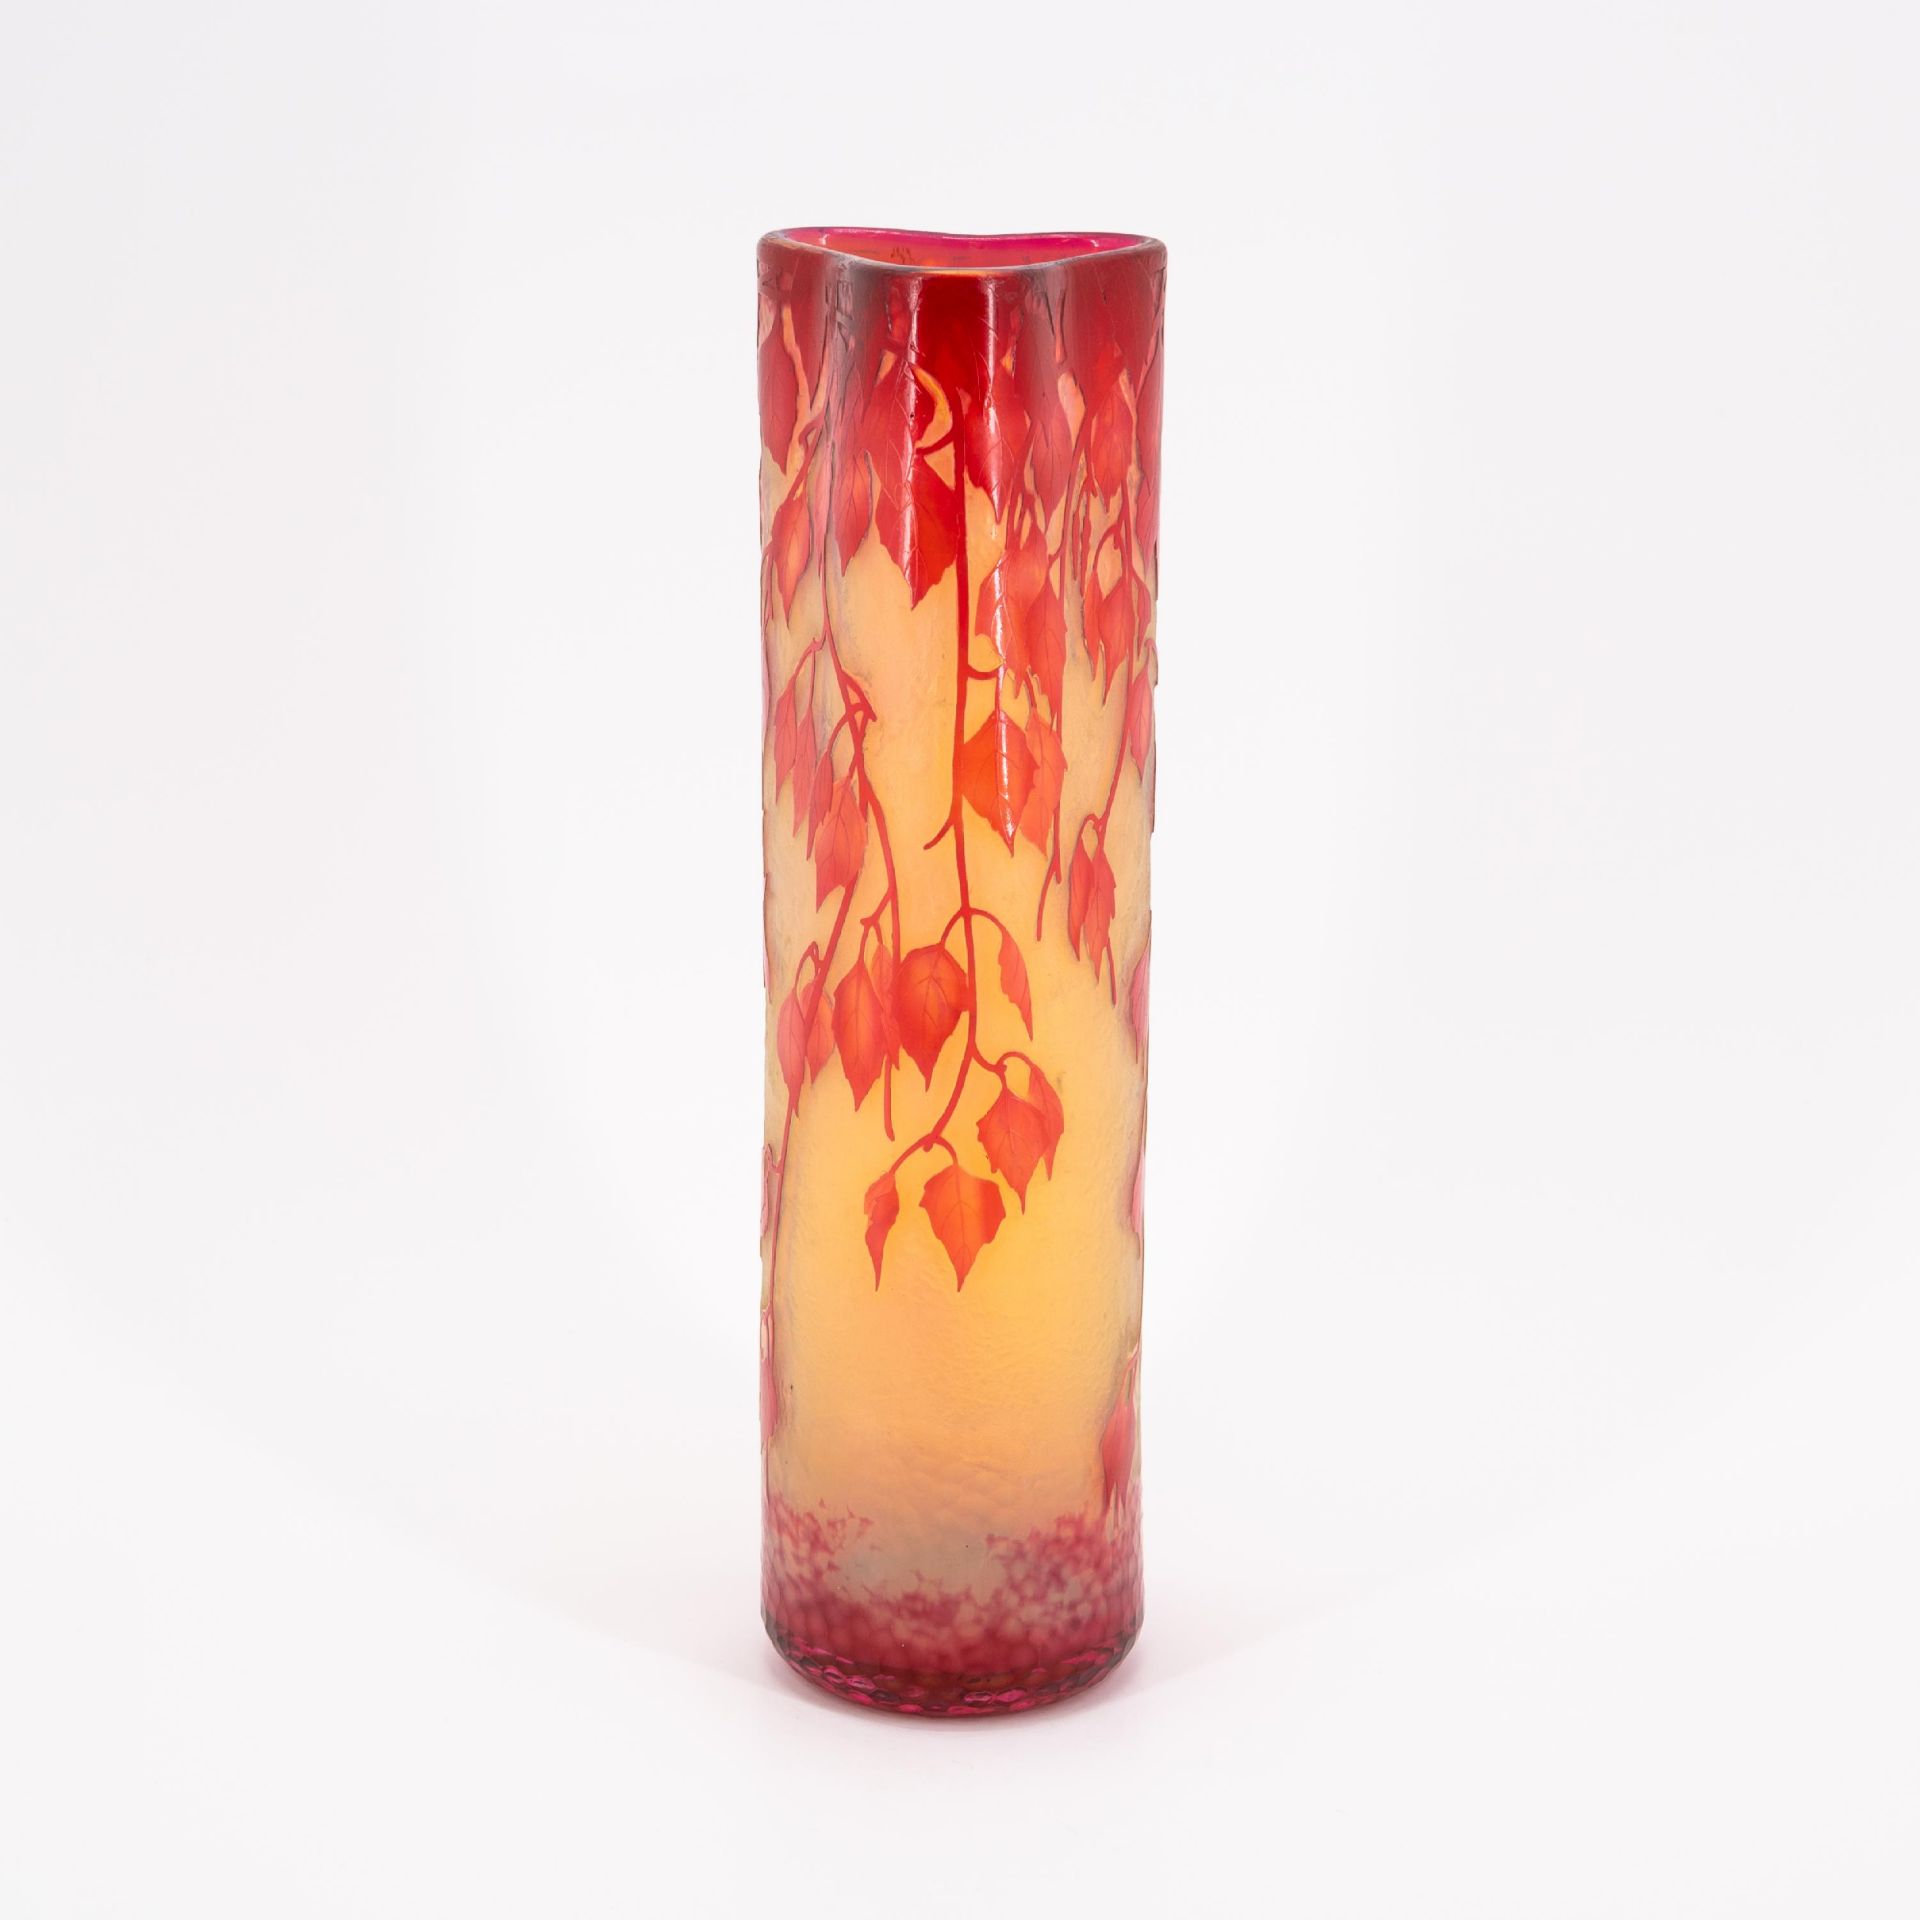 CYLINDER-SHAPED GLASS VASE WITH BIRCH LEAVES - Image 2 of 6